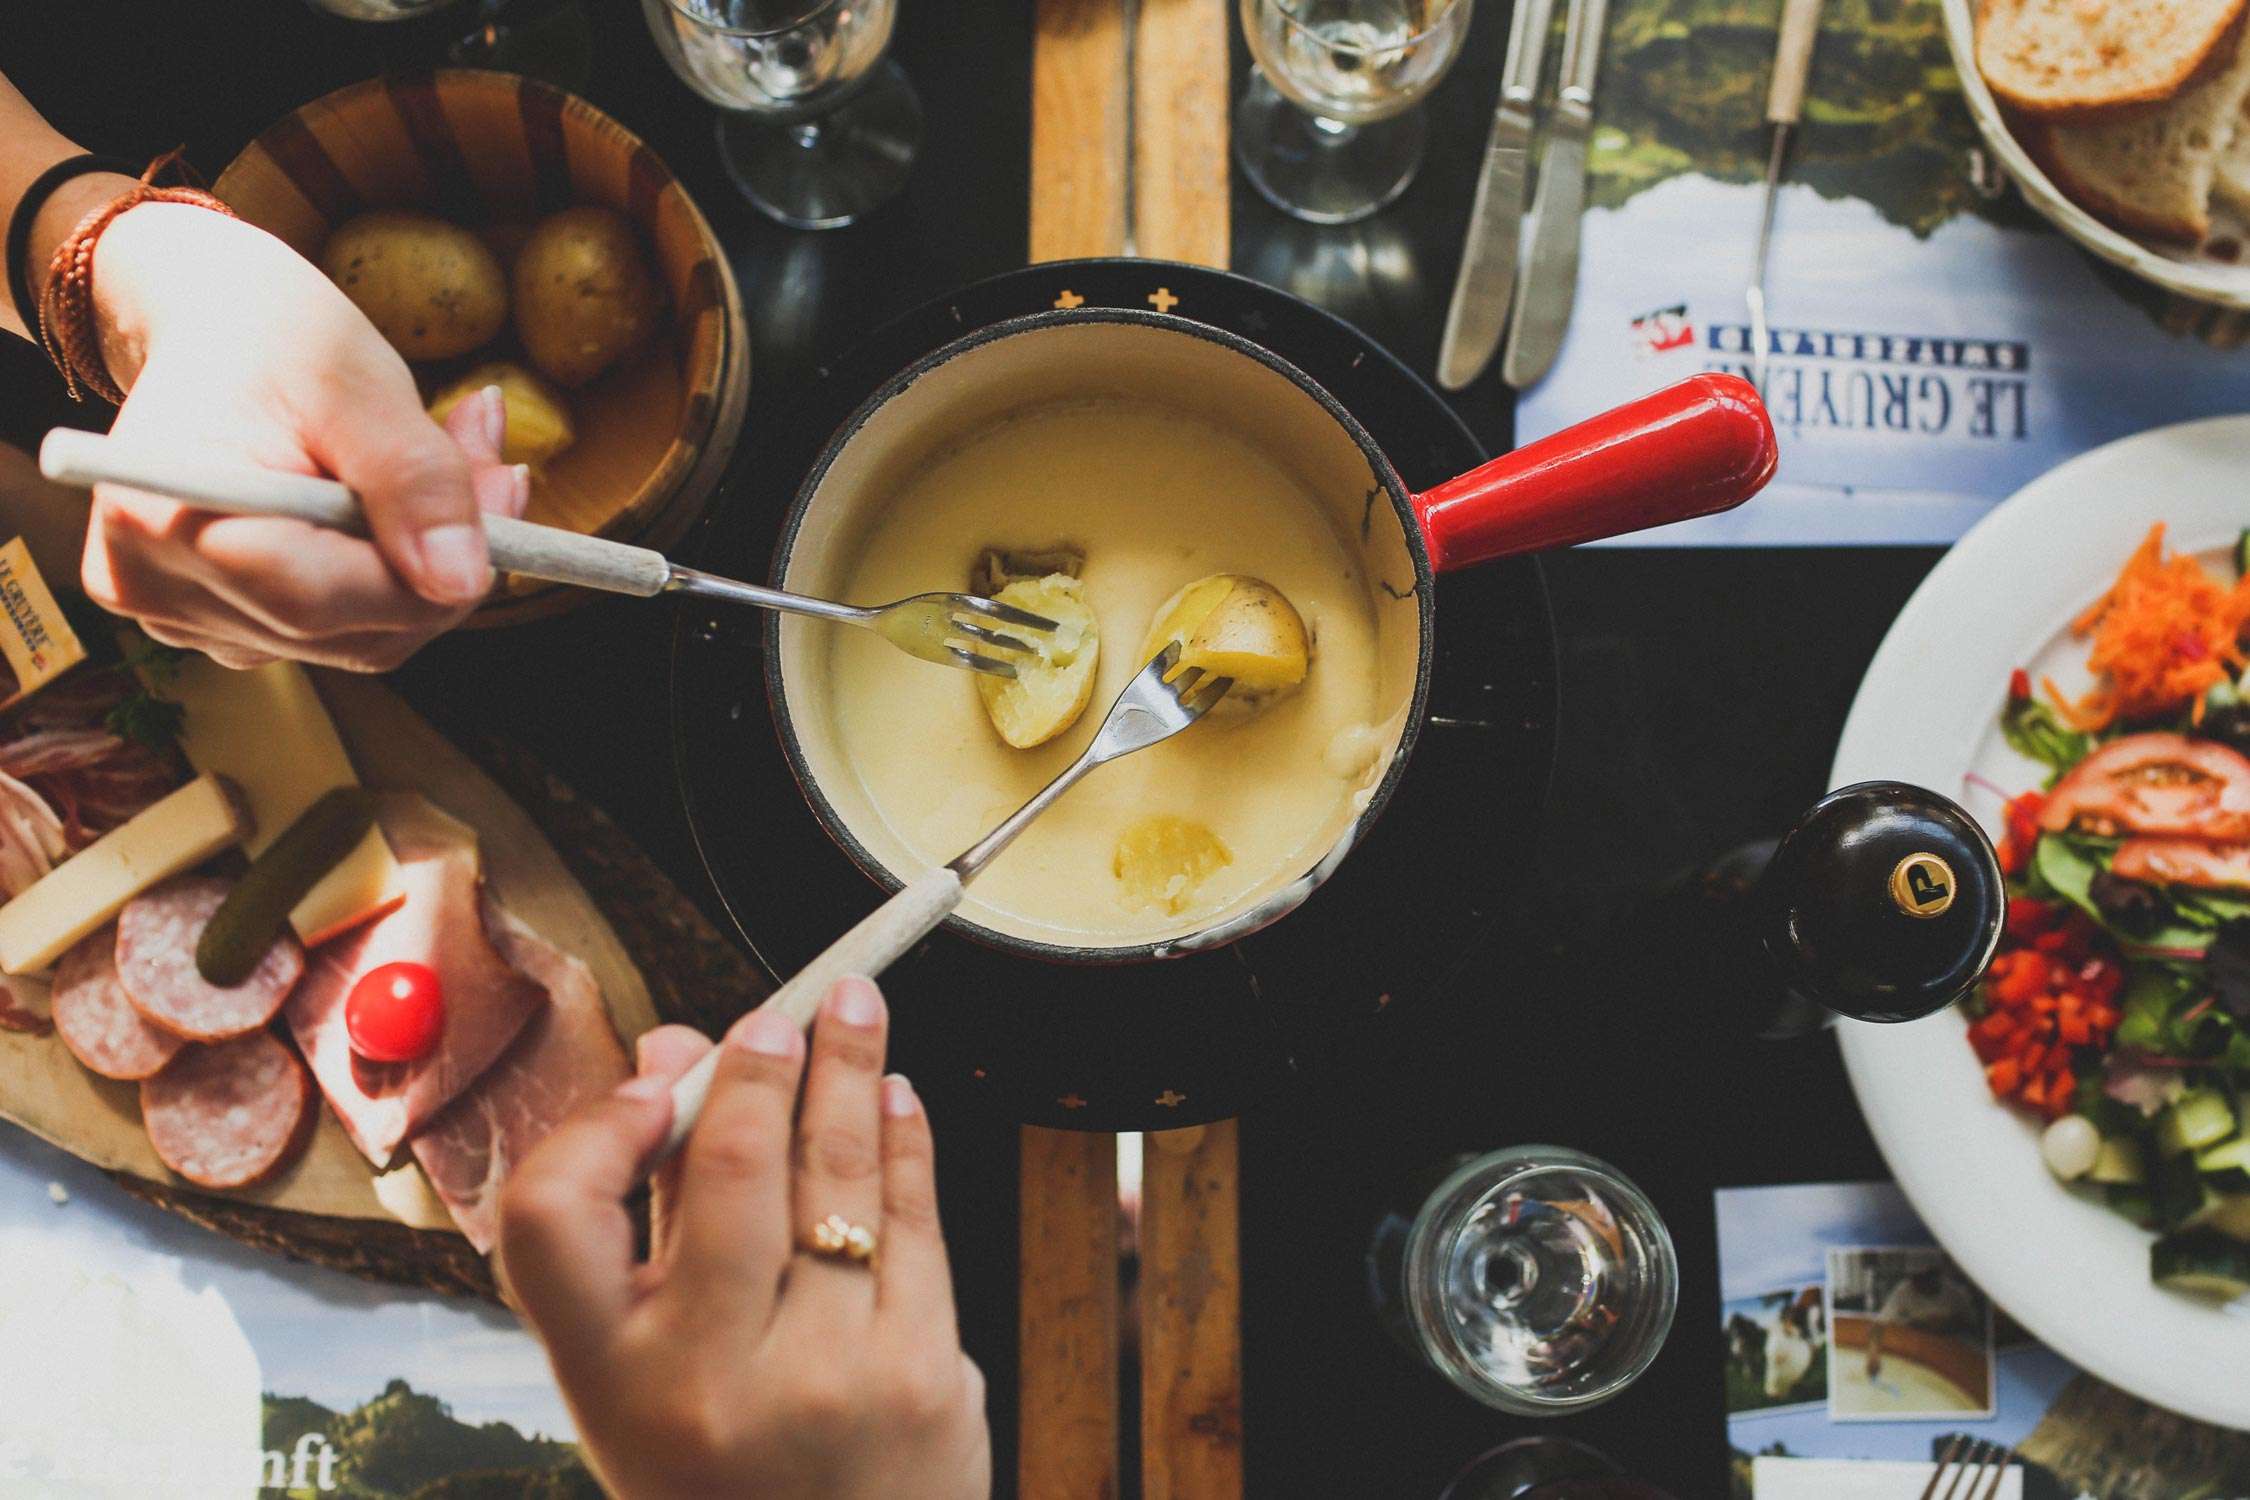 Two people holding forks are dipping food into the fondue.